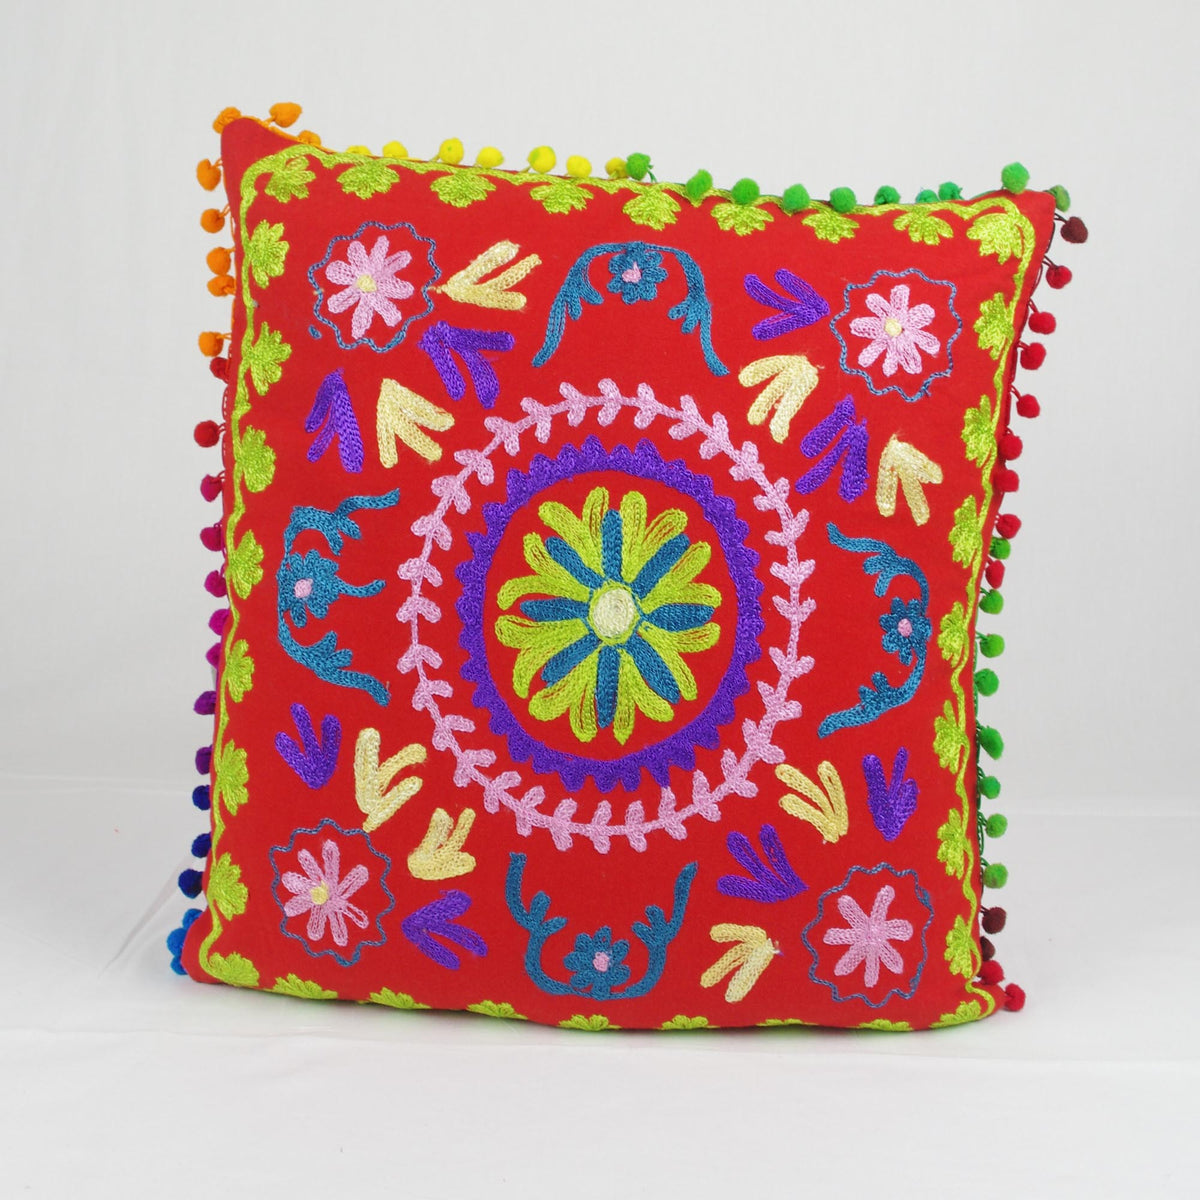 Suzani Woolen Embroidered Cotton Square Cushion Cover - Red